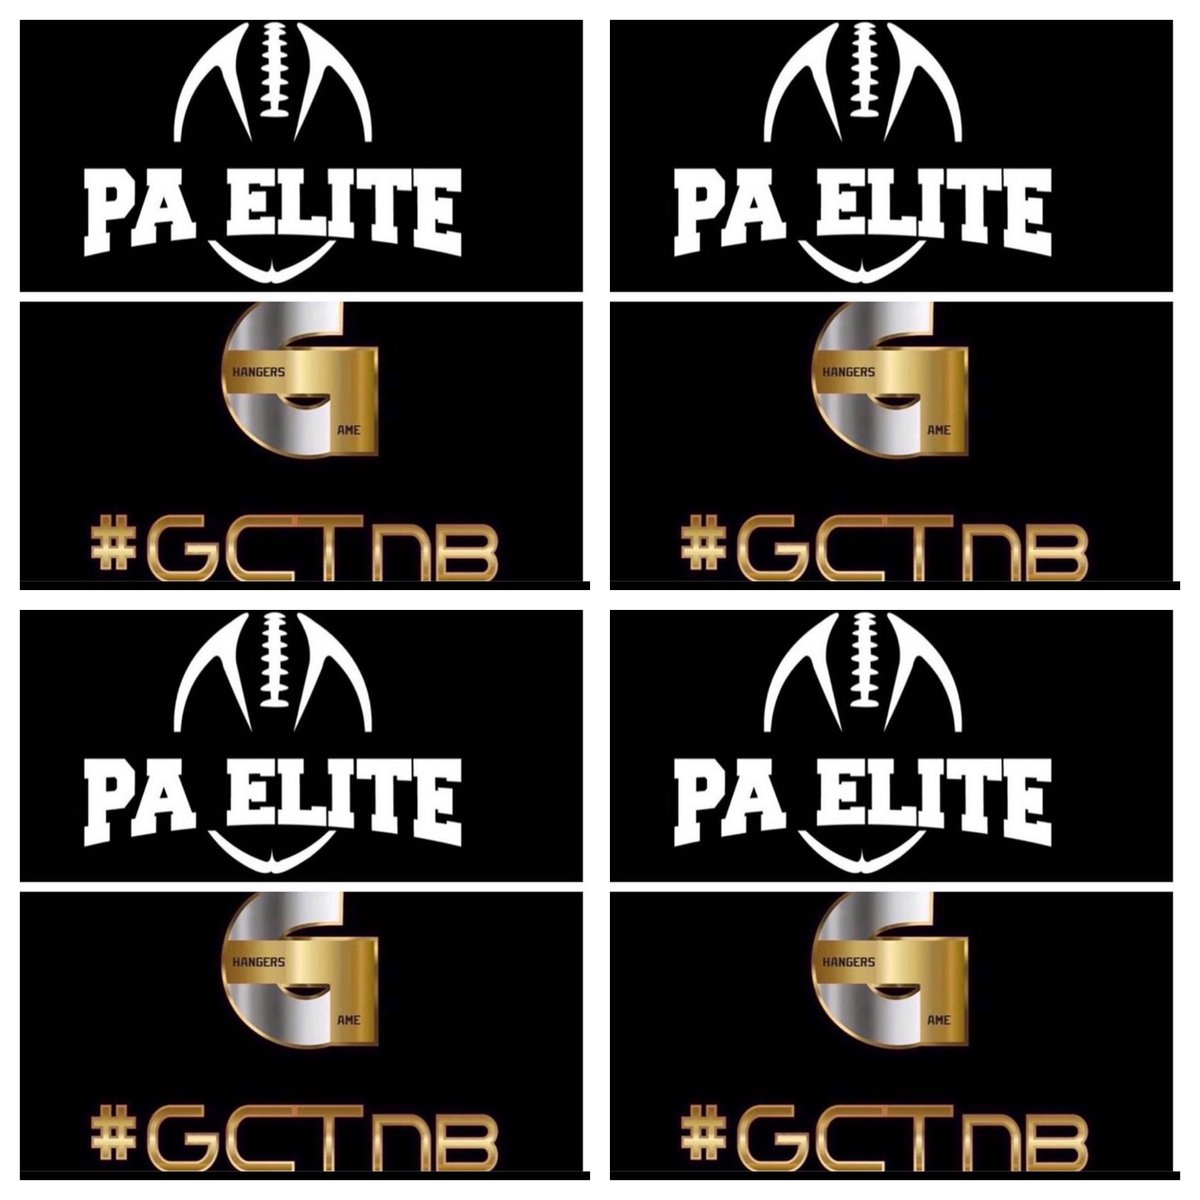 Last tournament of the year. Looking forward to seeing the guys compete. 

#Champ7v7
#PAELITE
#TruXposur